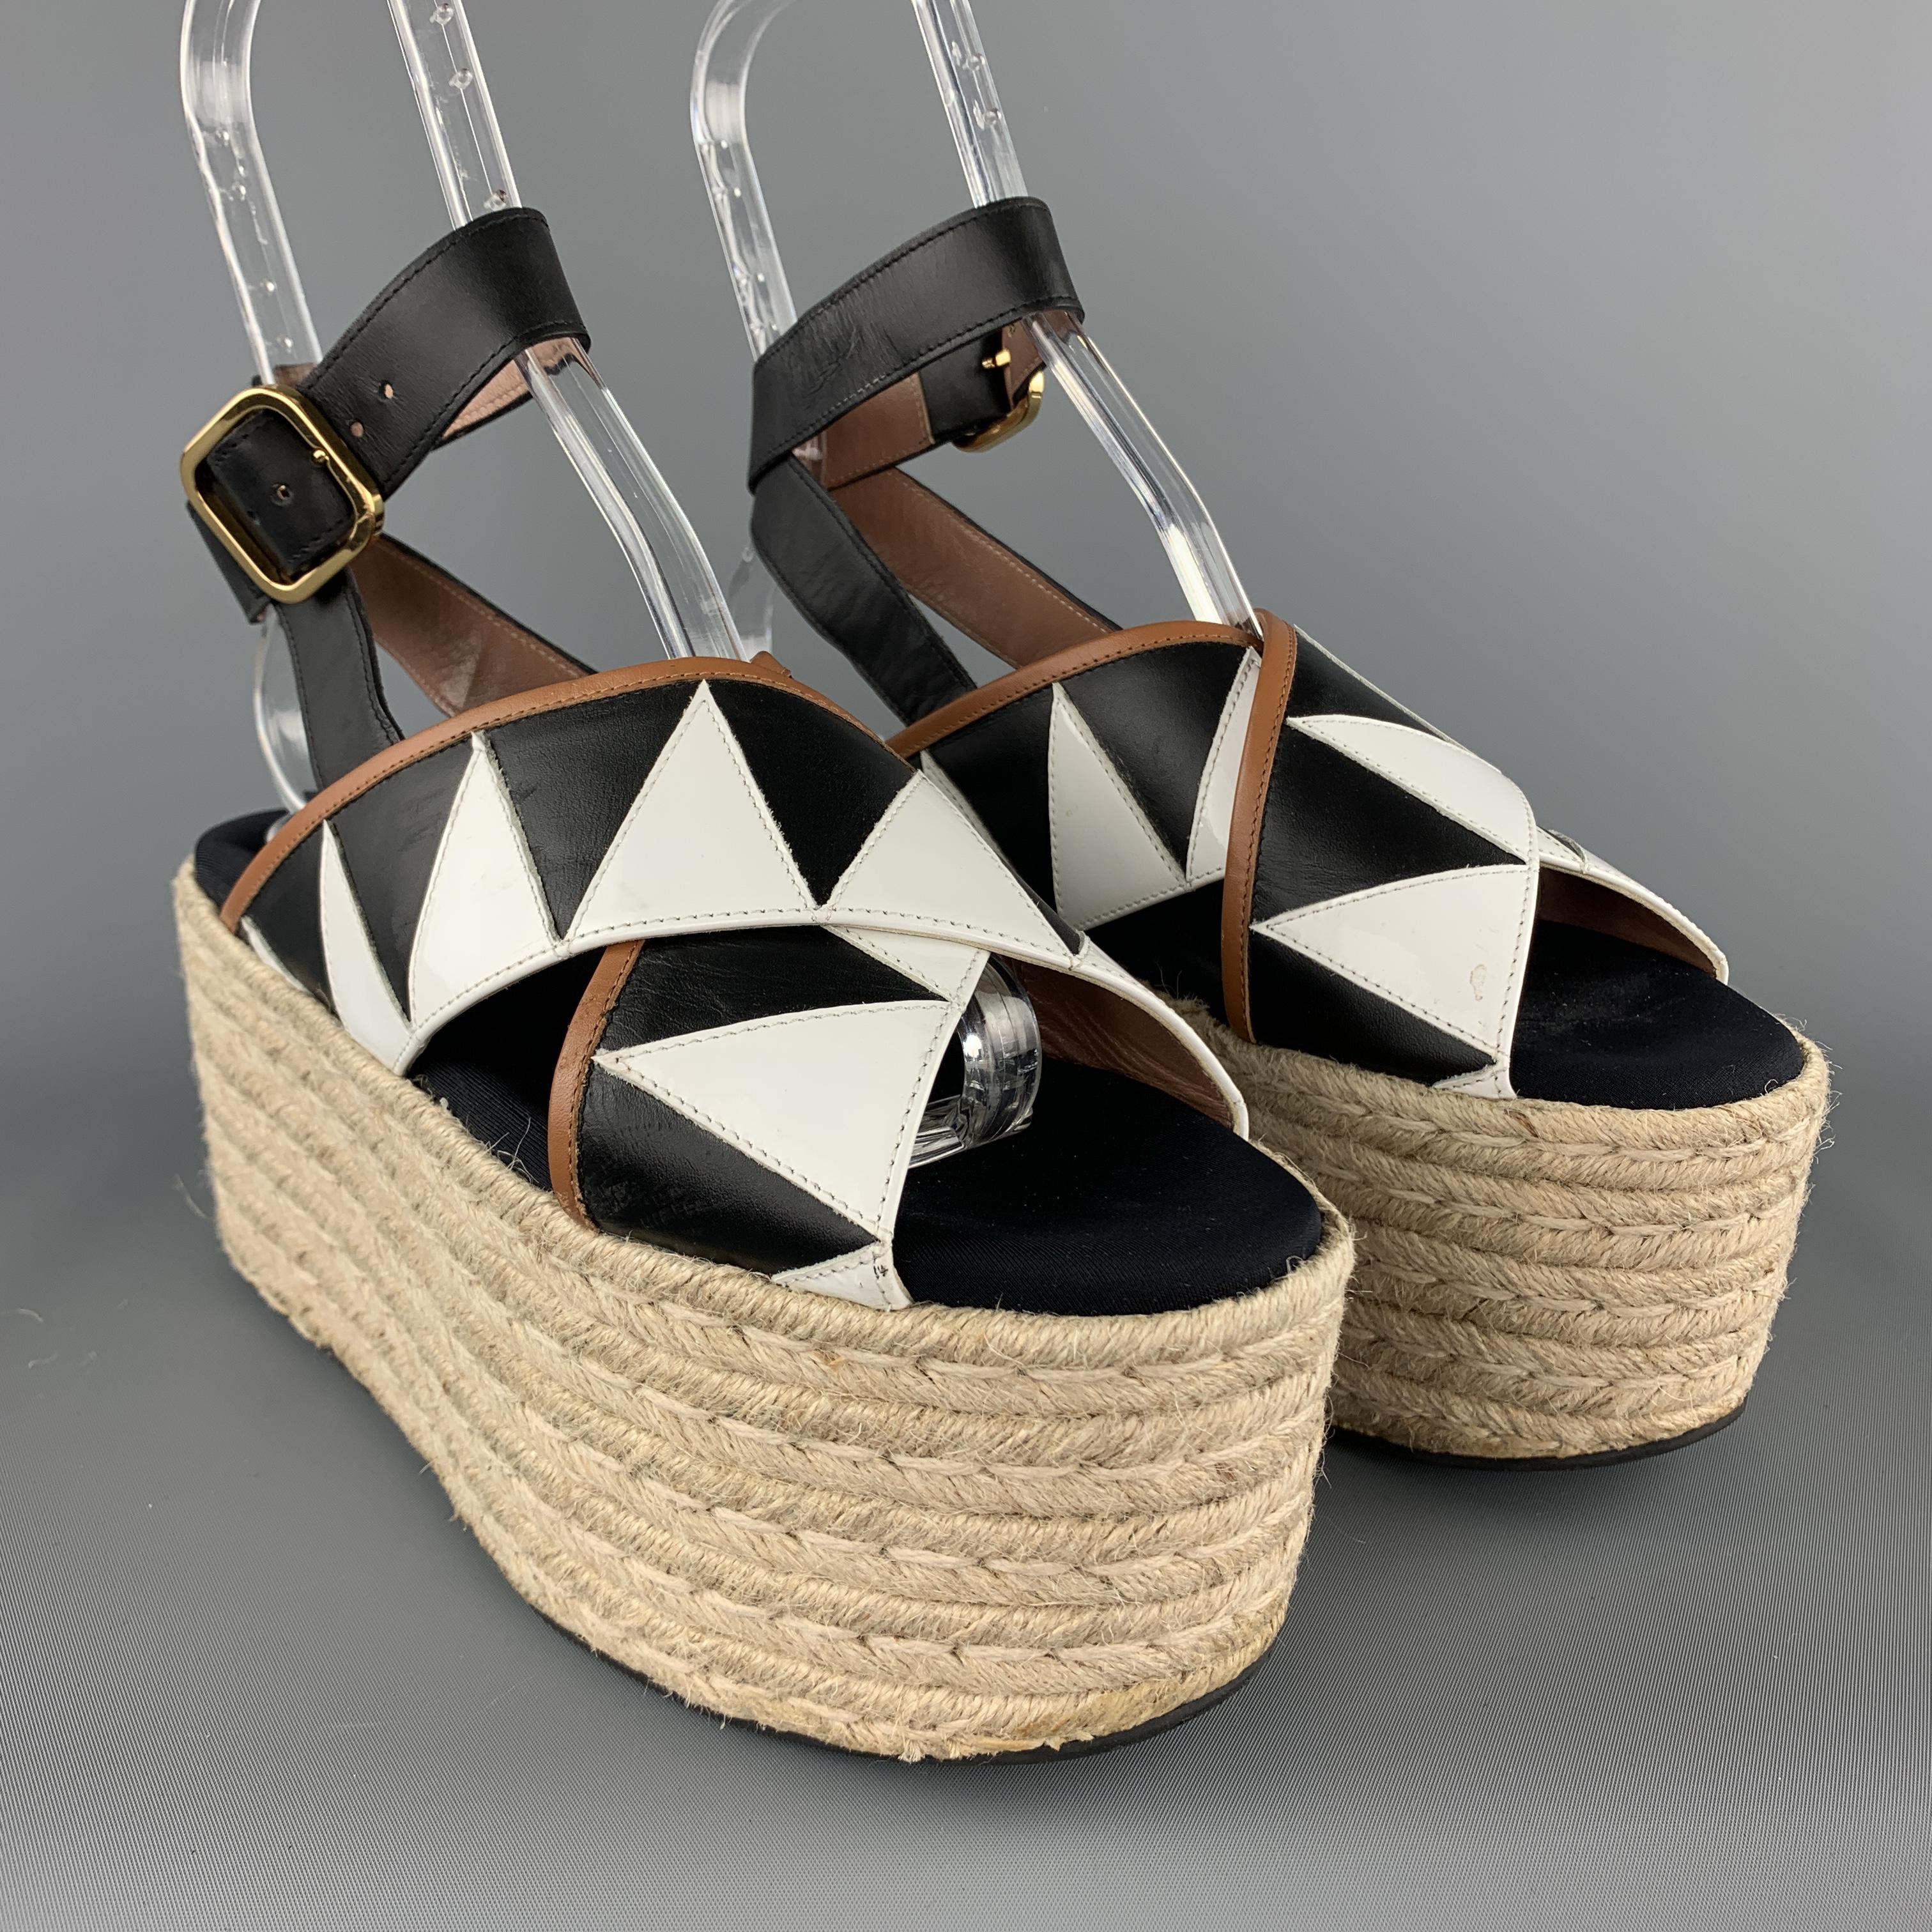 MARNI sandals feature black and white color block cross straps, ankle harness, and chunky braided espadrille platform sole. Made in Italy.

Excellent Pre-Owned Condition.
Marked: IT 39

Measurements:

Heel: 3.5 in.
Platform: 3.5 in.